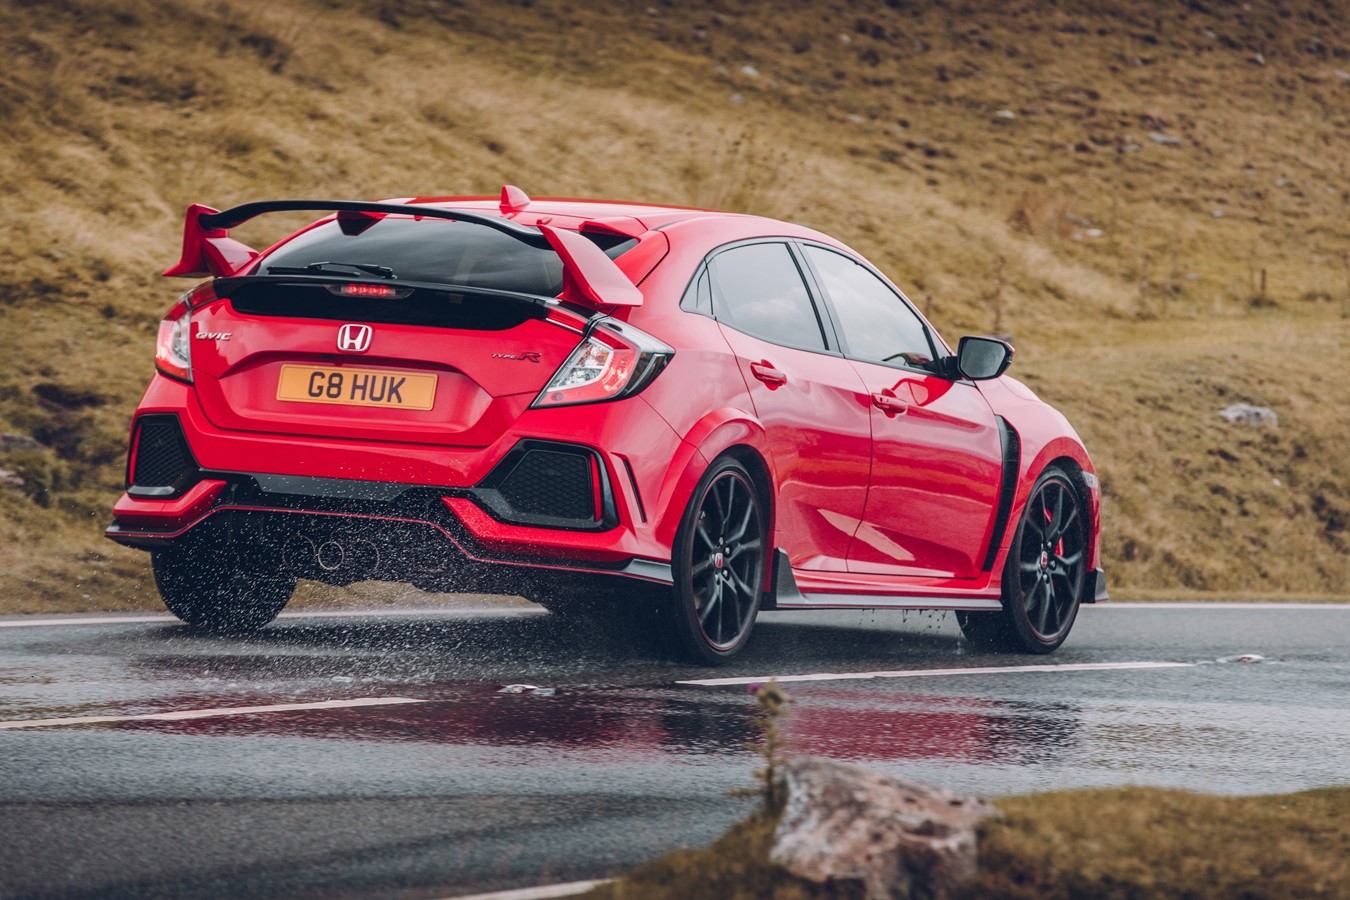 Civic Type R wins BBC TopGear Magazine Car of the Year